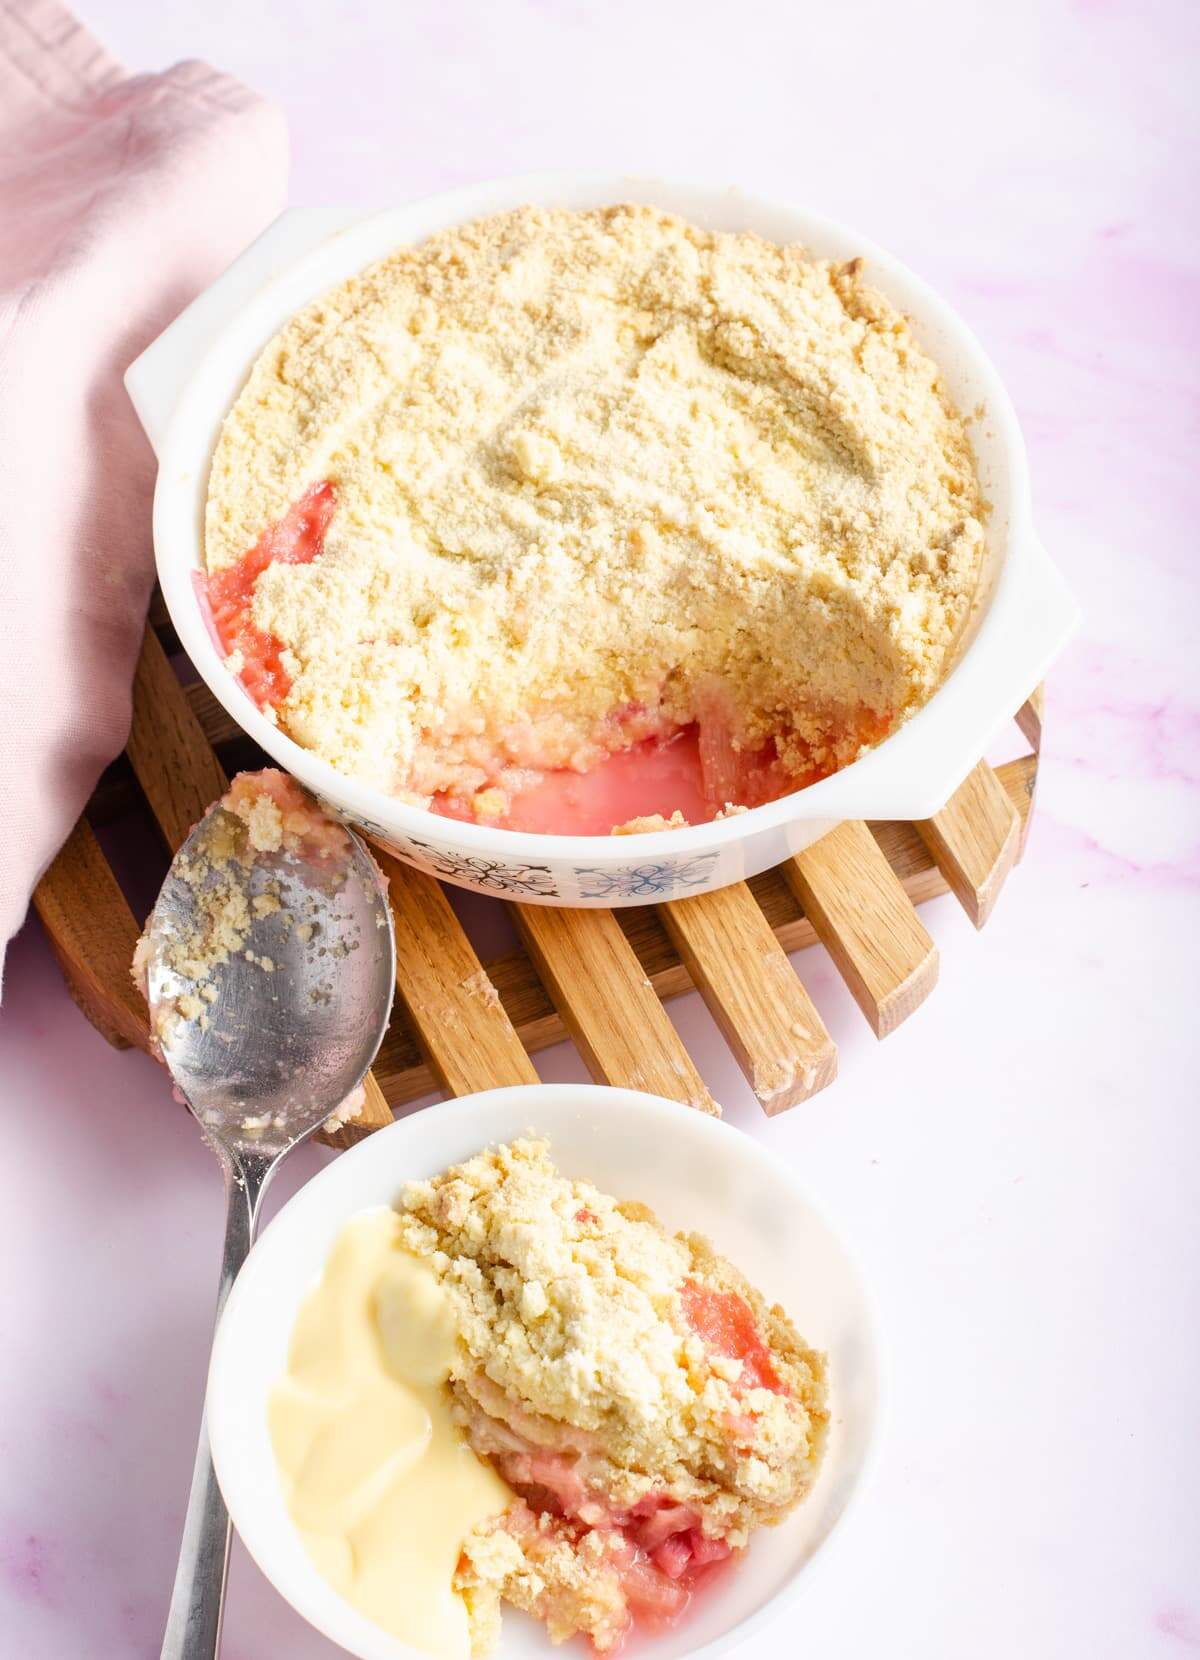 Rhubarb crumble with a portion taken out and sitting in a bowl with custard, a pink napkin to the back and the serving dish on a wooden trivet.